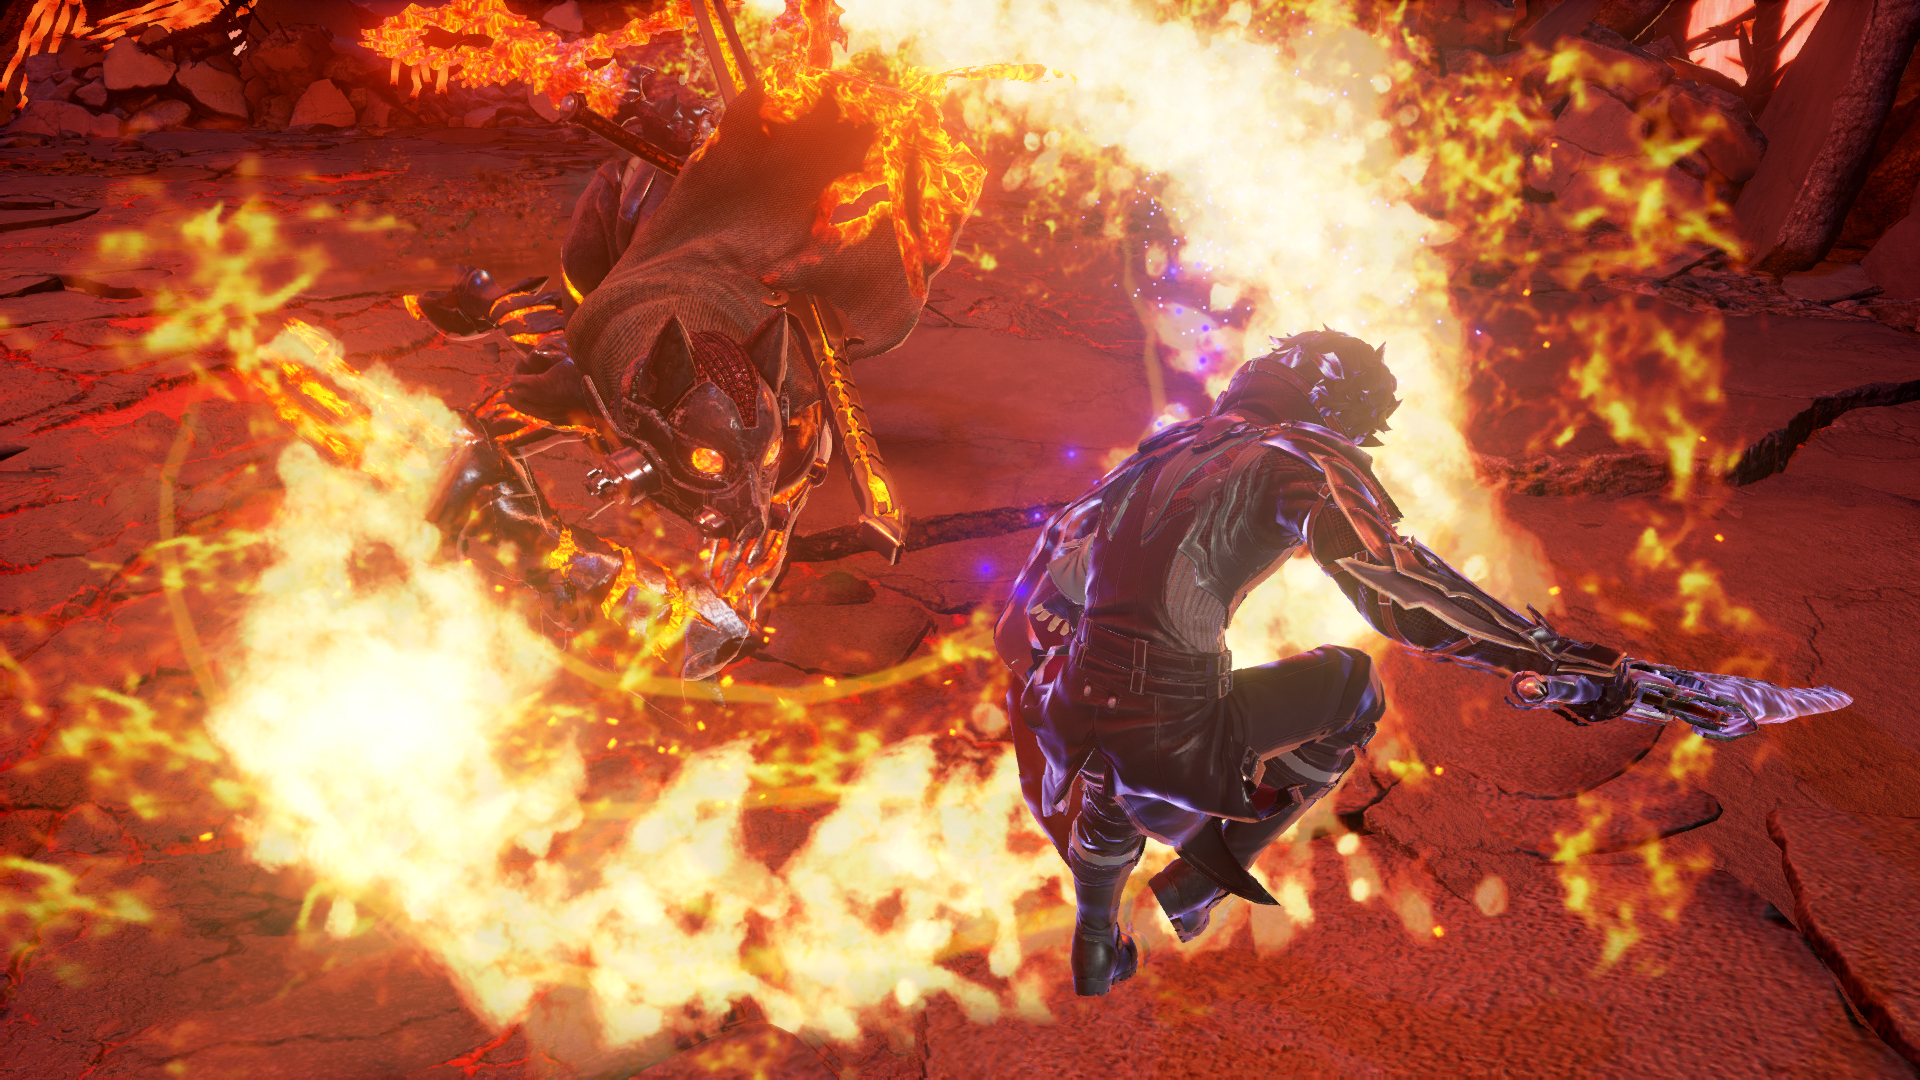 New Code Vein Gameplay Showcased Ice And Fire Stage - Ougaming